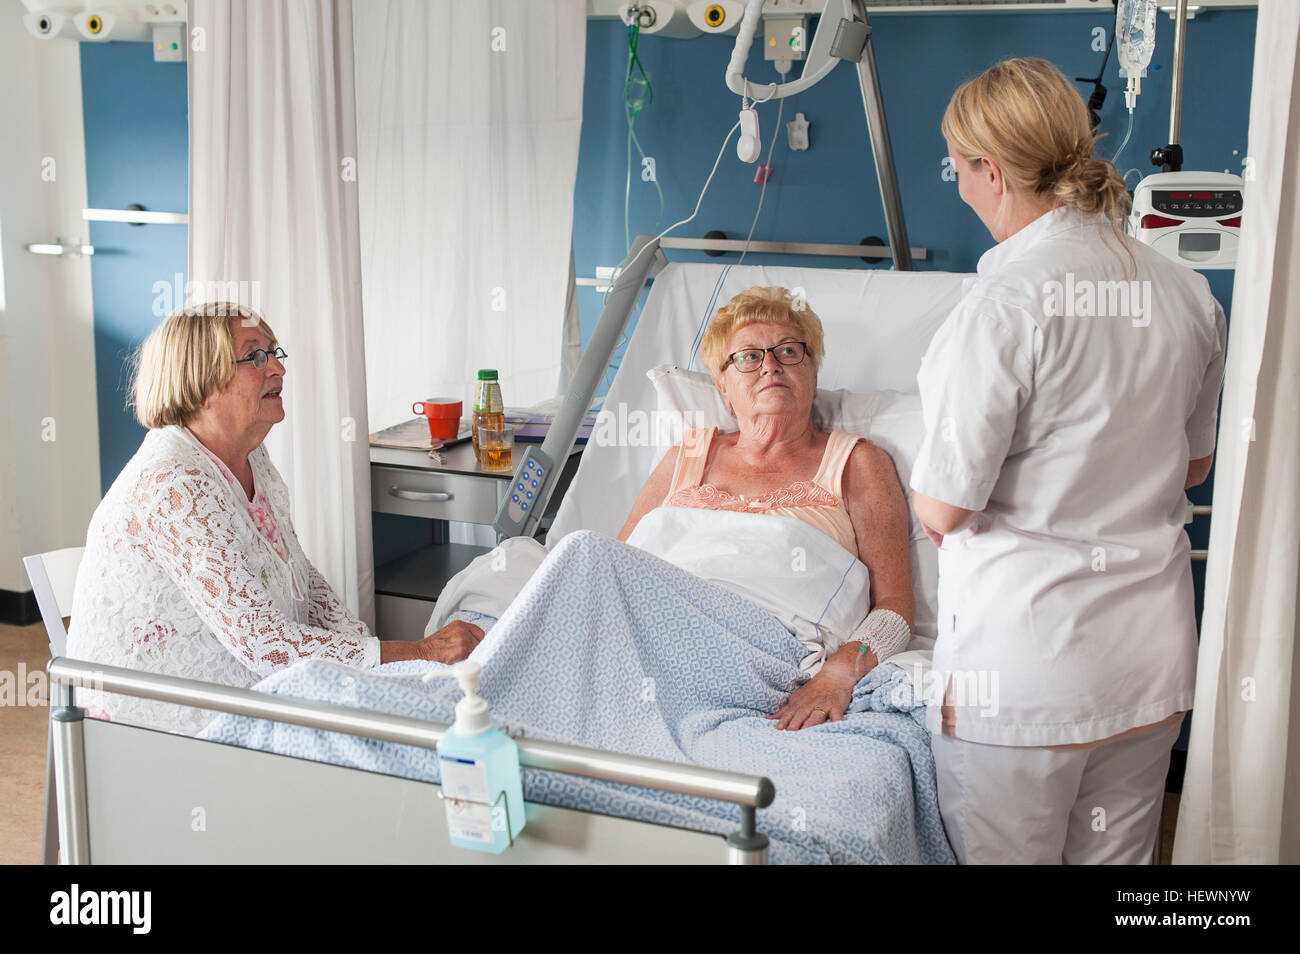 Nurse and visitor tending to patient in hospital bed Stock Photo